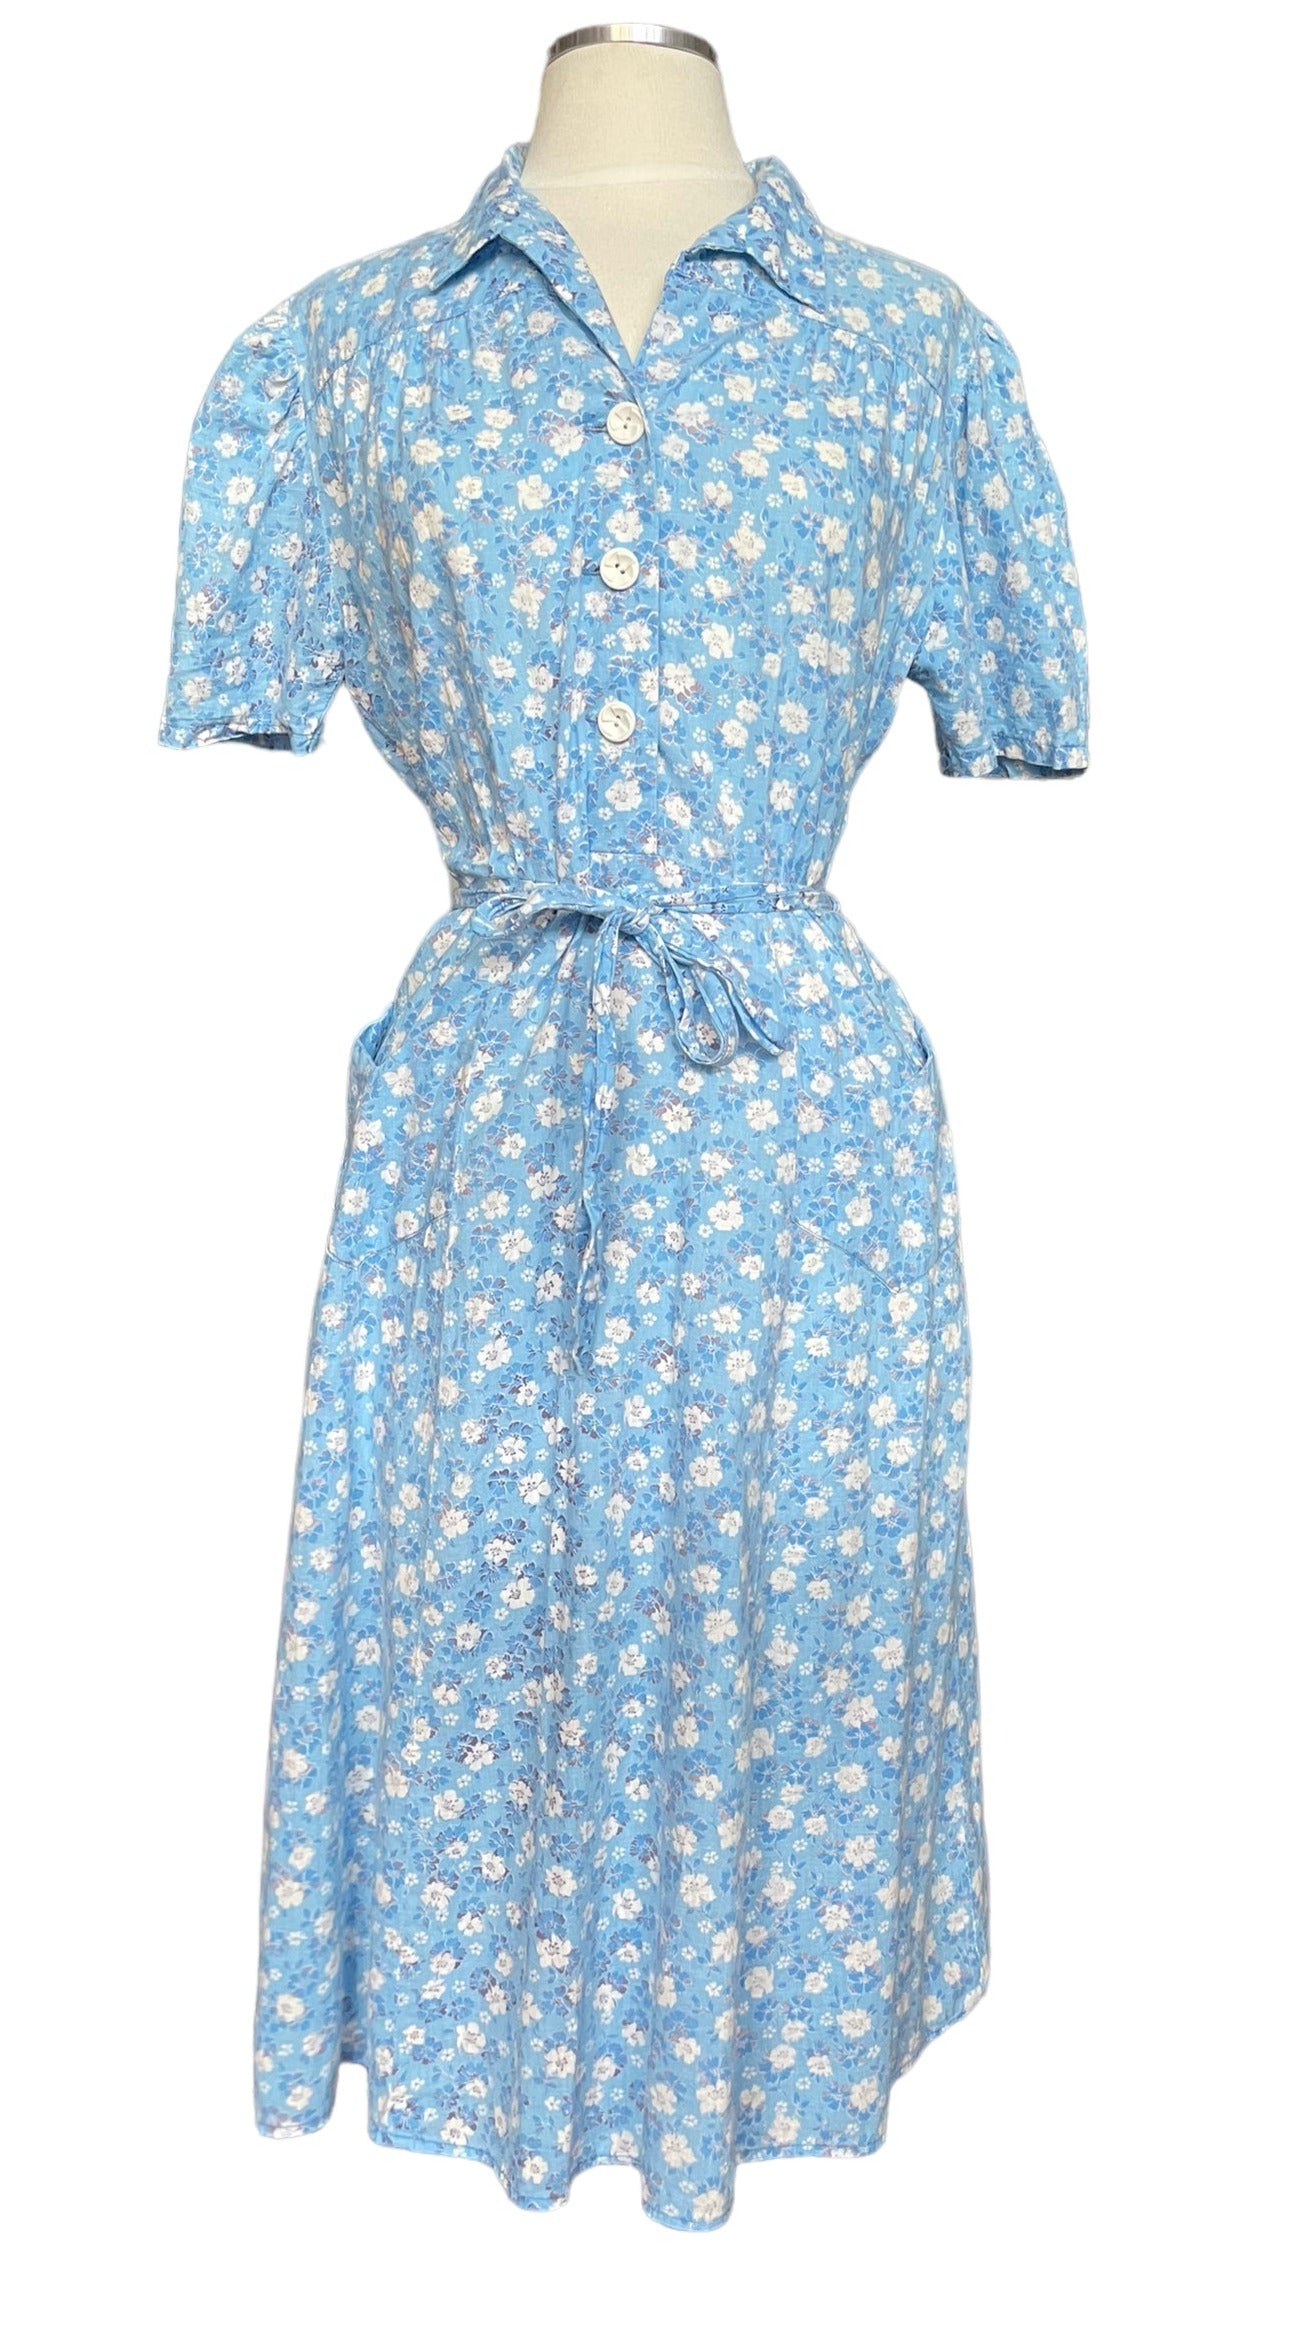 Full front view of Early 1950s Floral House Dress | Seattle True Vintage | Barn Owl Ladies Vintage